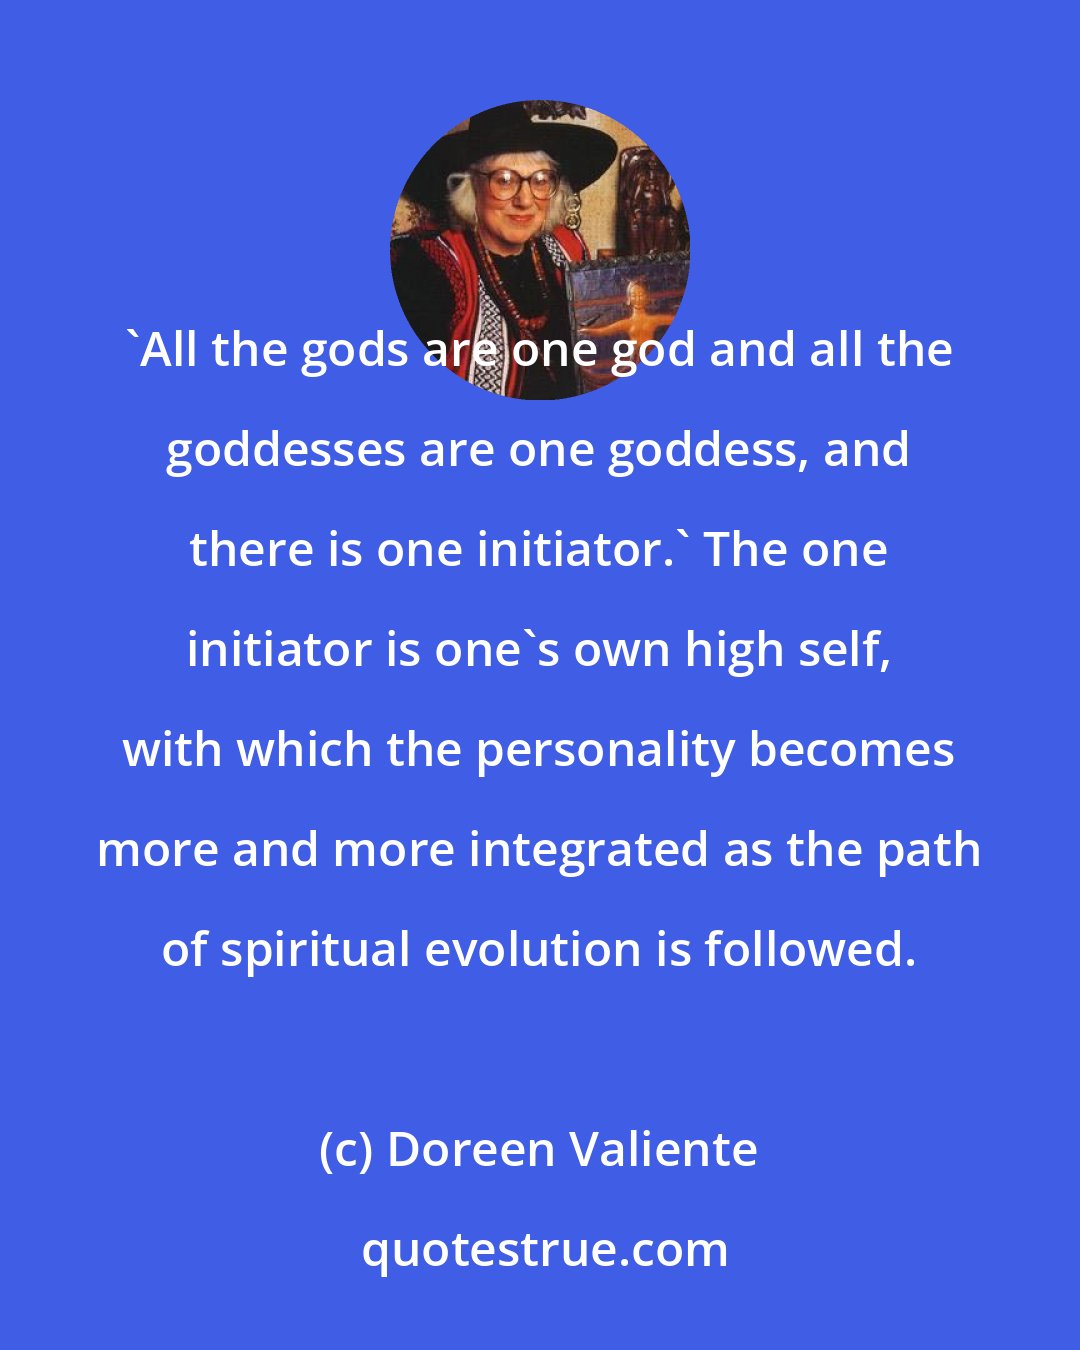 Doreen Valiente: 'All the gods are one god and all the goddesses are one goddess, and there is one initiator.' The one initiator is one's own high self, with which the personality becomes more and more integrated as the path of spiritual evolution is followed.